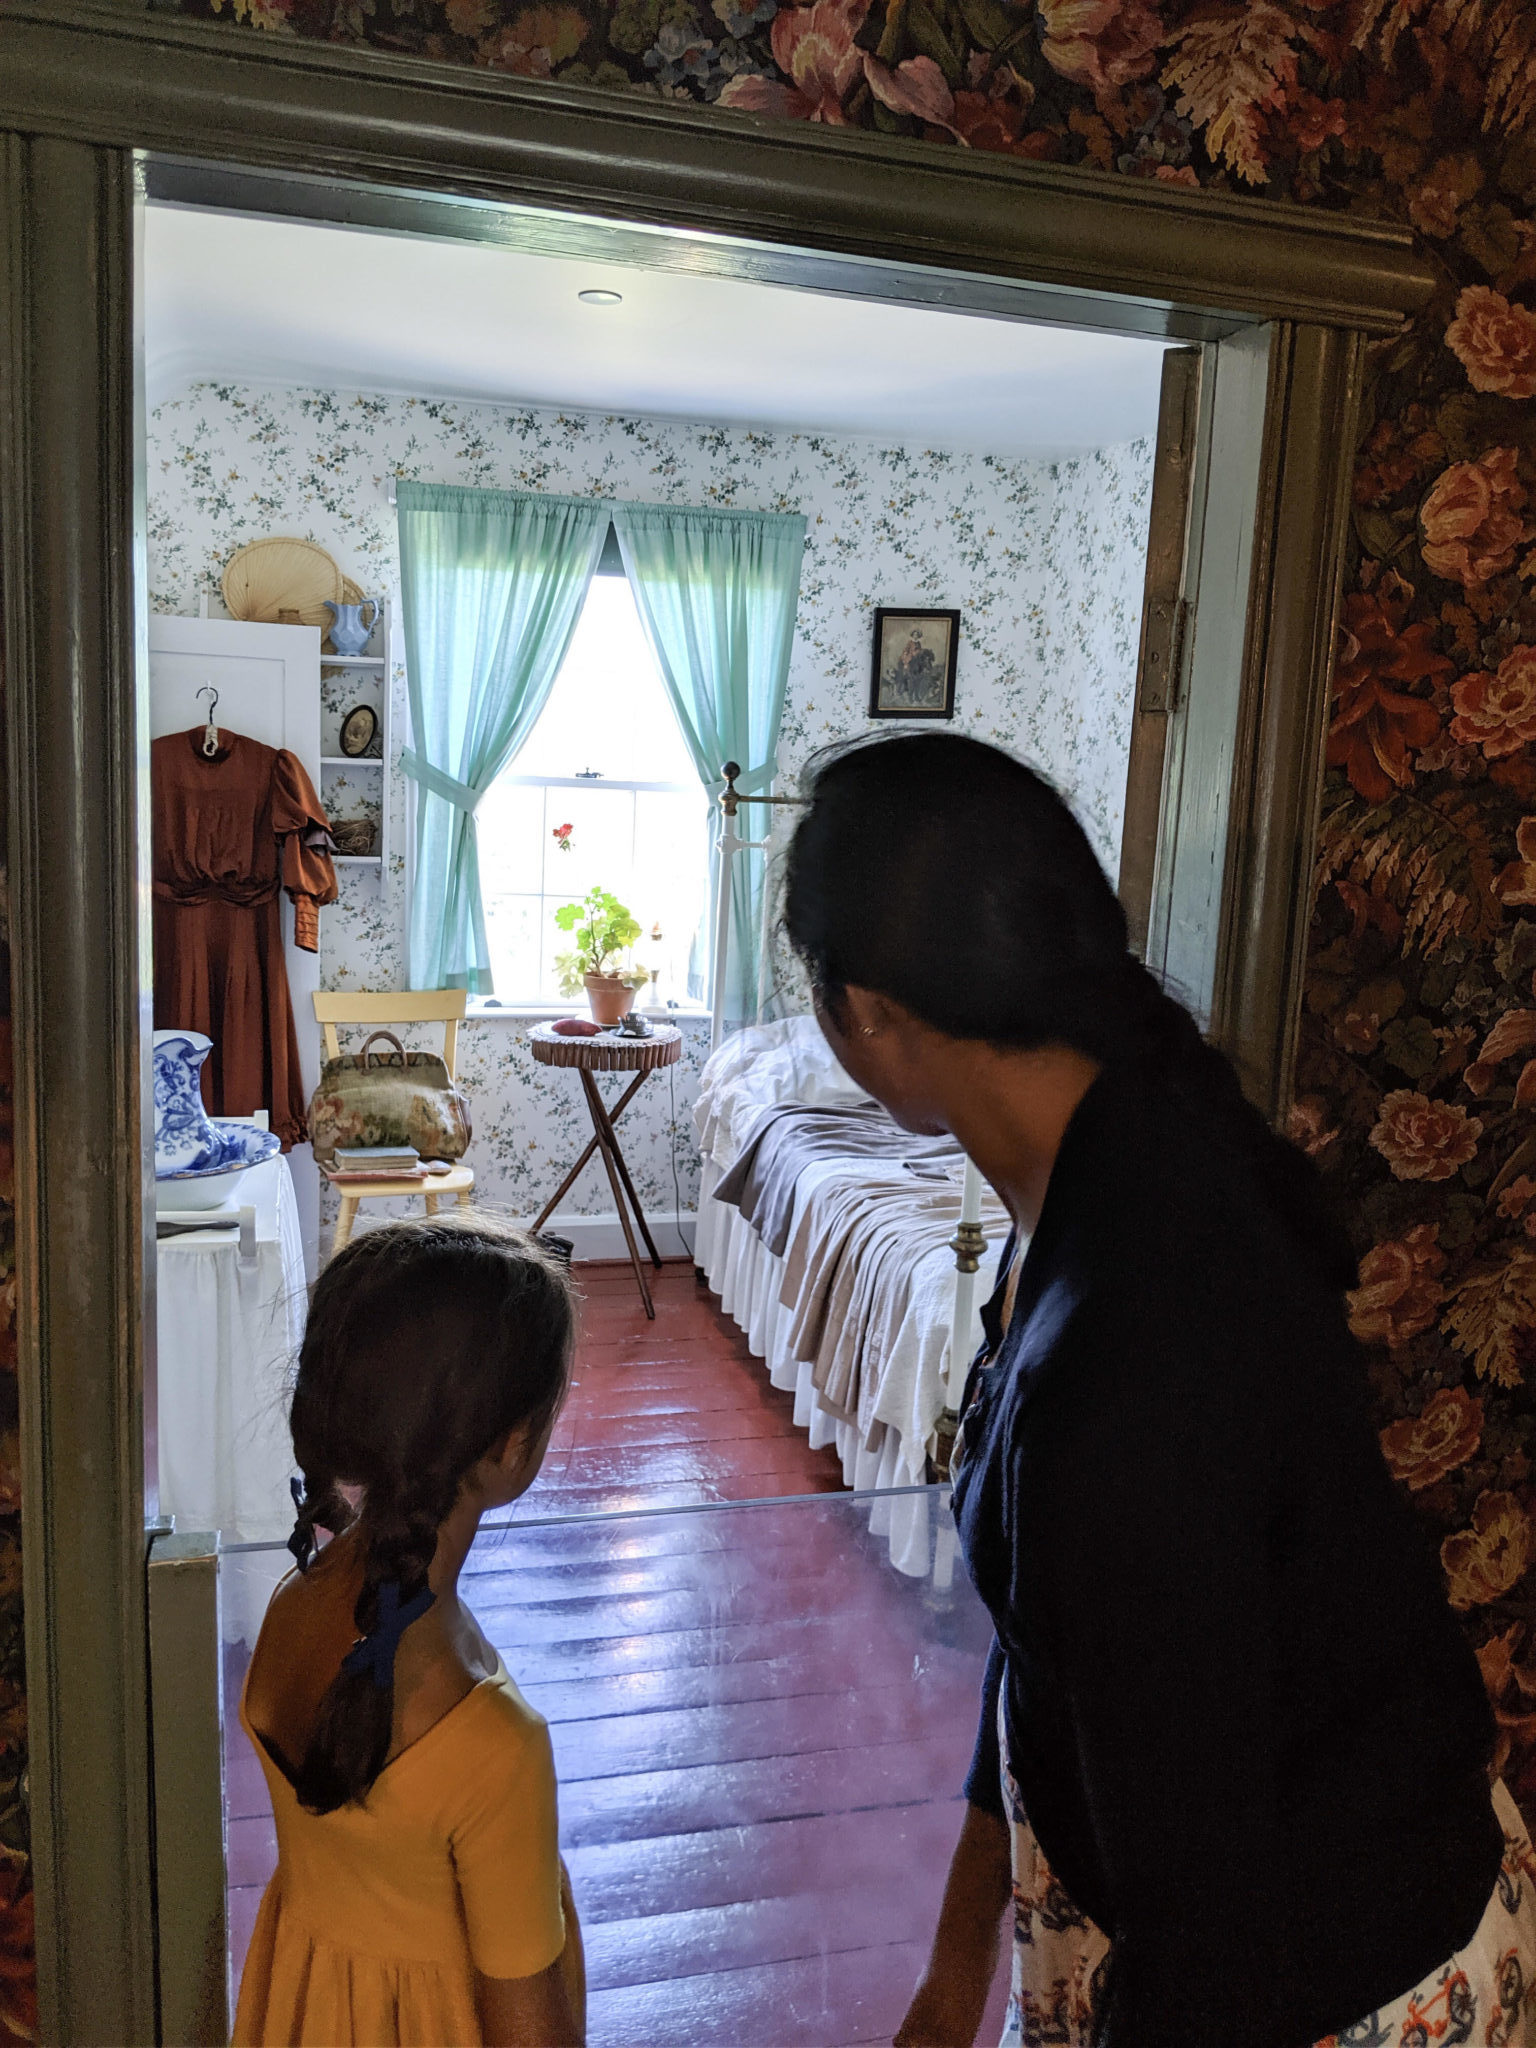 visit Anne of Green Gables house in PEI